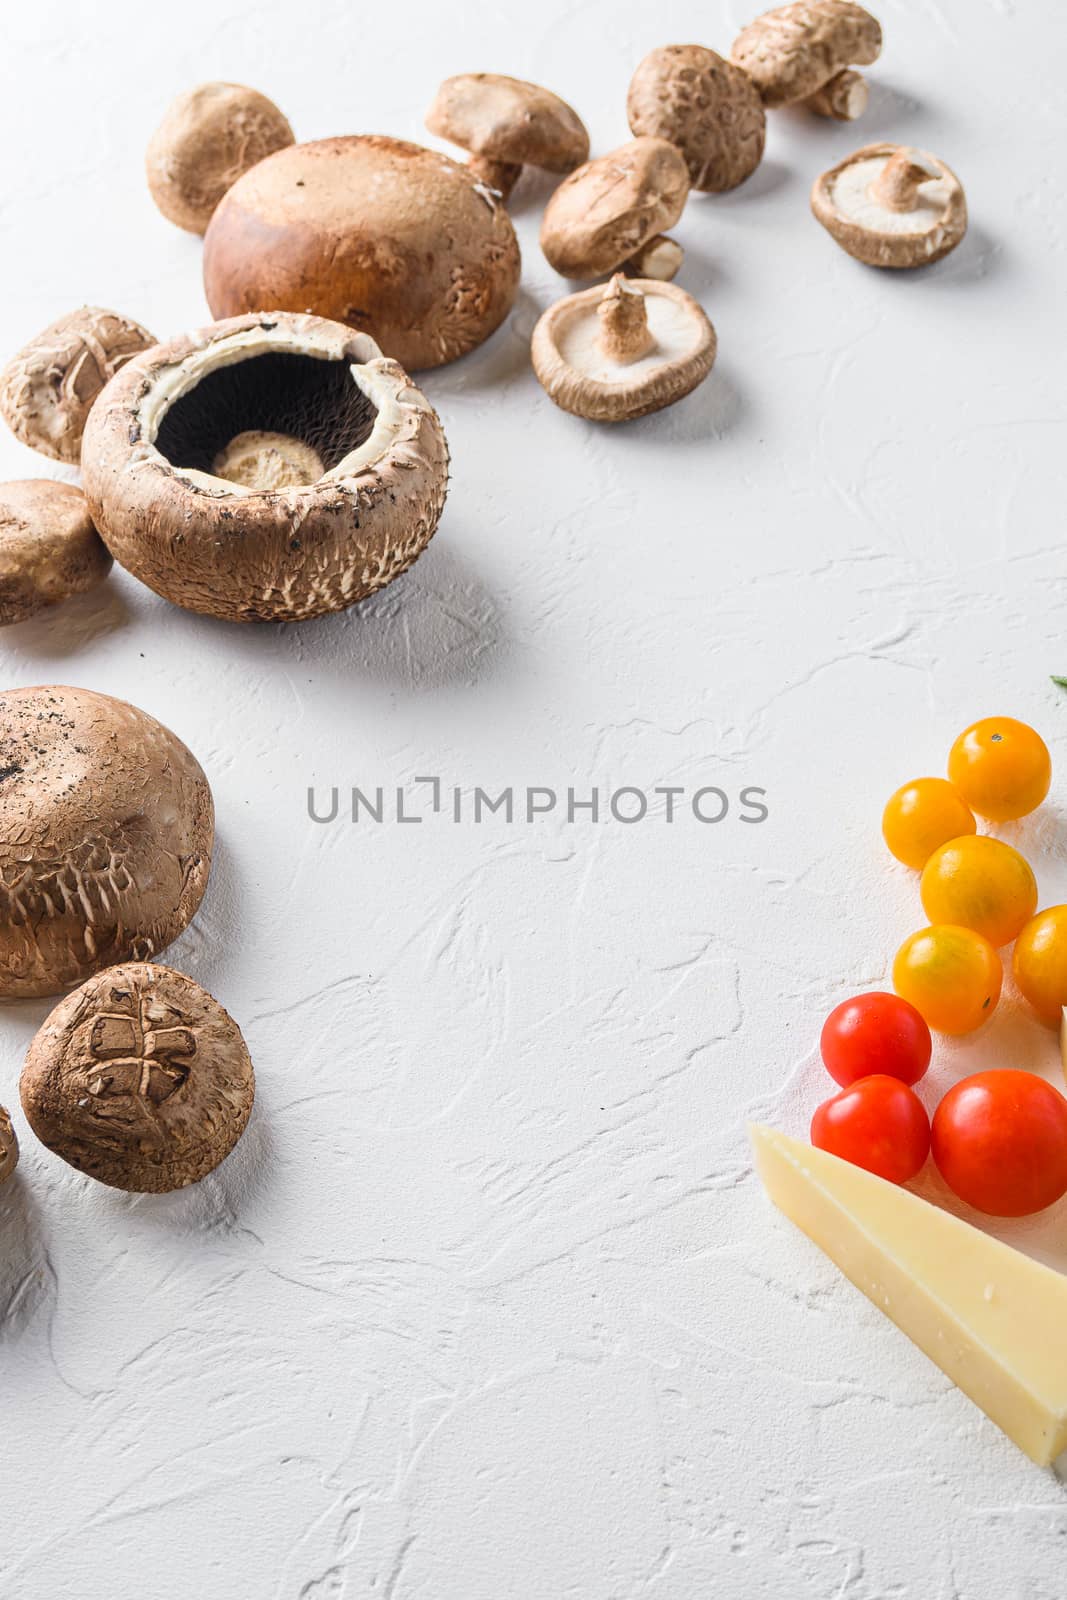 Portobello and ingredients for baking cheddar cheese, cherry tomatoes and sage on white background top view concept framed space for text. by Ilianesolenyi